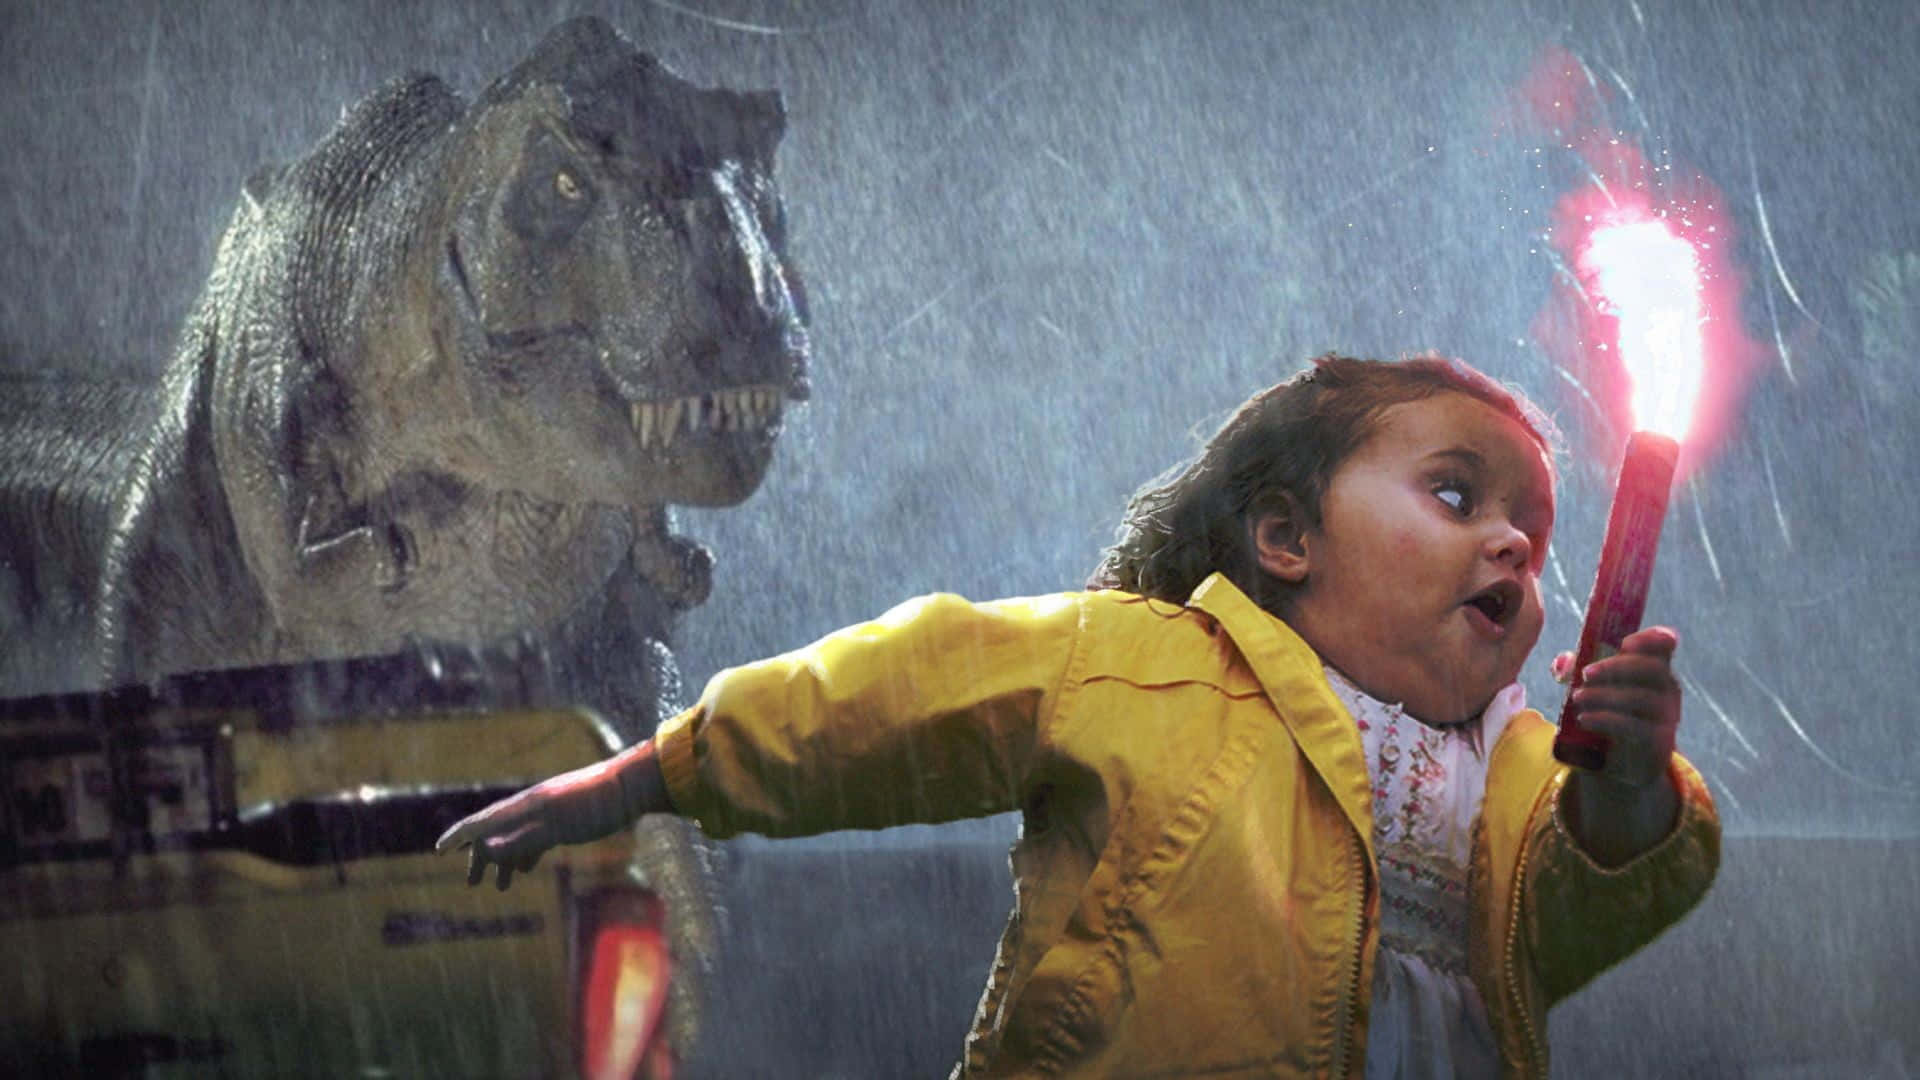 Dinosaur Chasing A Baby Meme Picture